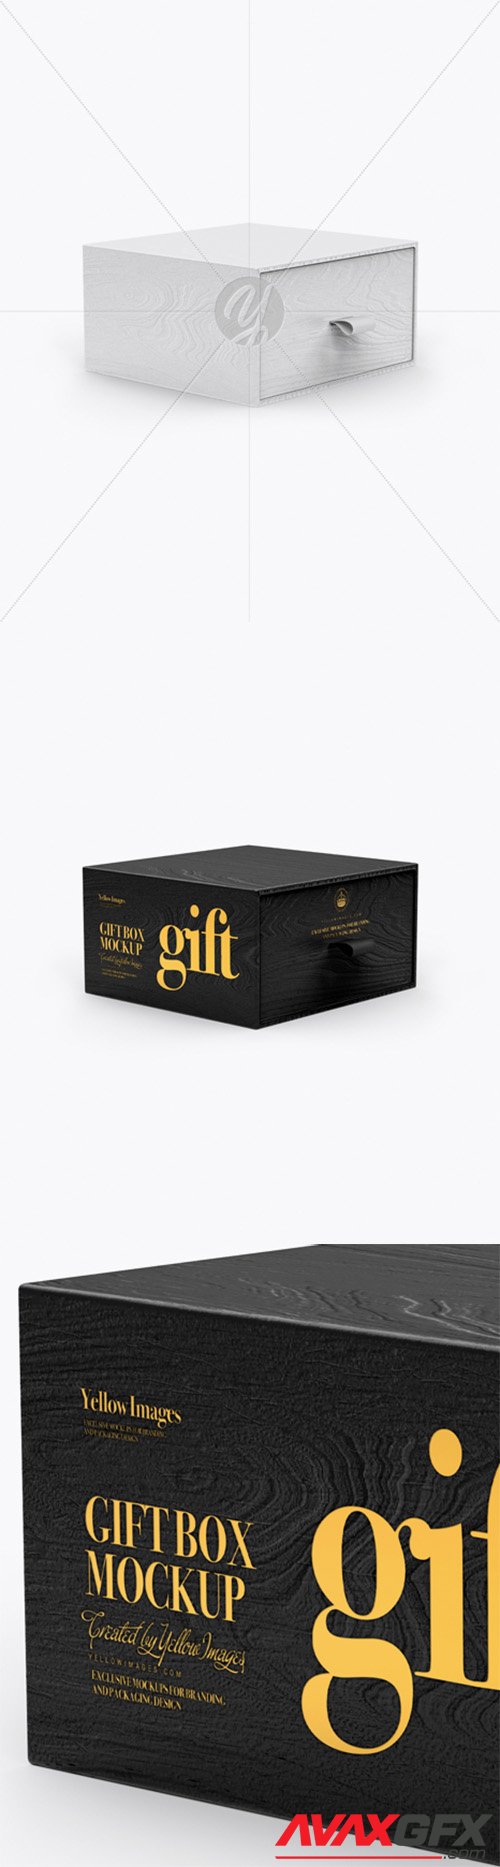 Download Wooden Gift Box Mockup Half Side View 21796 Avaxgfx All Downloads That You Need In One Place Graphic From Nitroflare Rapidgator PSD Mockup Templates